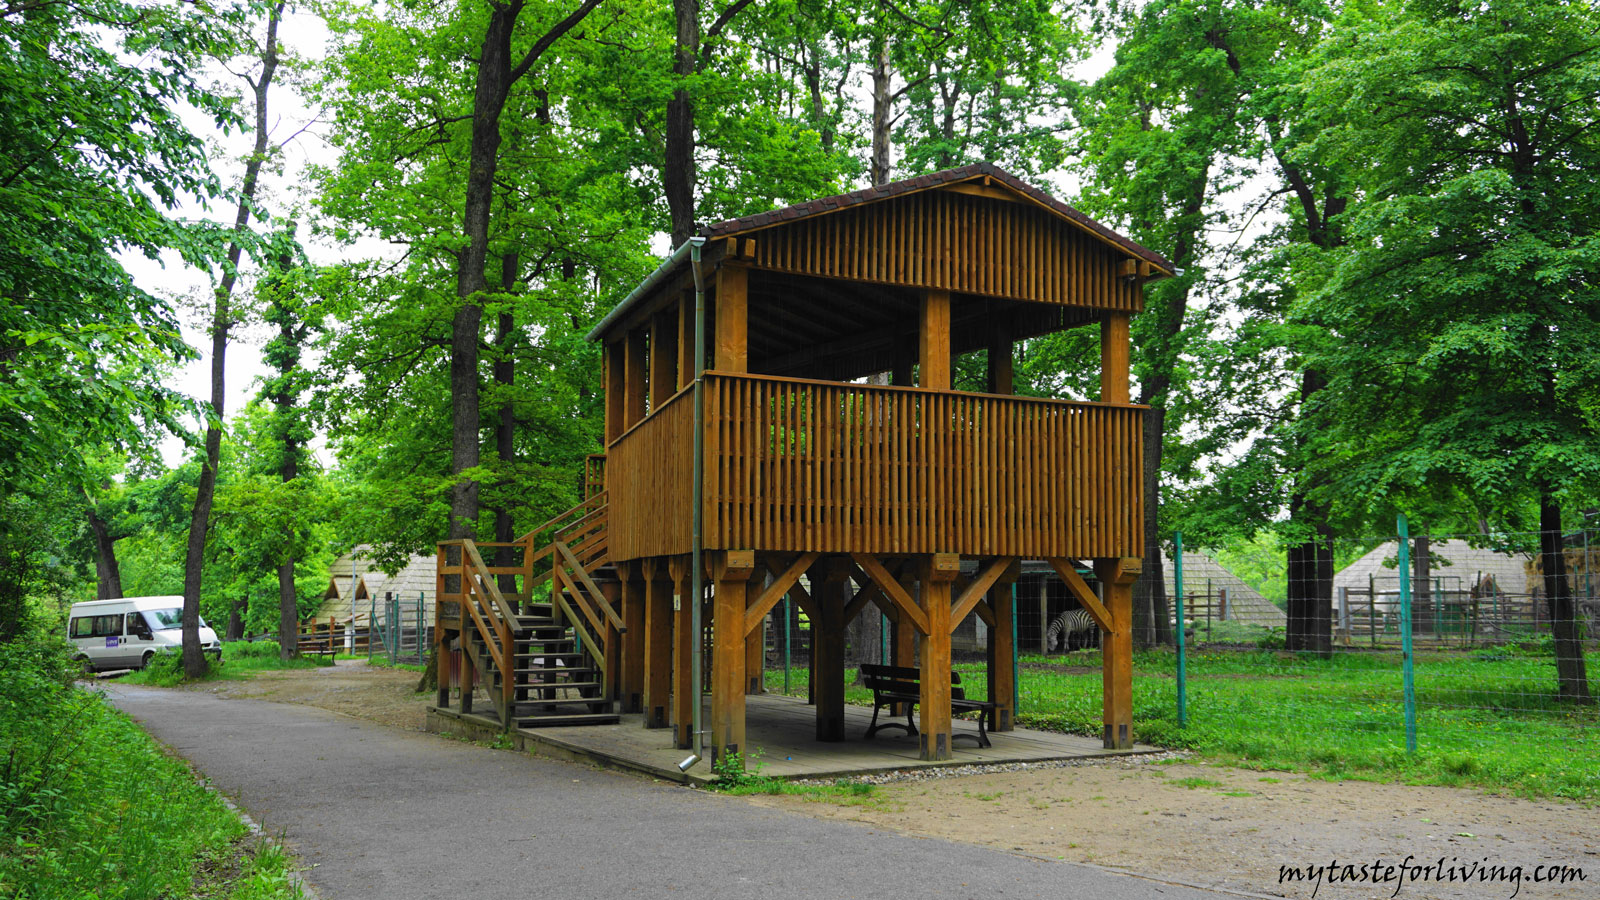 The zoo in Sibiu is the oldest zoo in Romania. It is among the best there and is very popular with the locals. It is located in a beautiful forest setting, around a large lake near Dumbrava Sibiului Natural Park. 